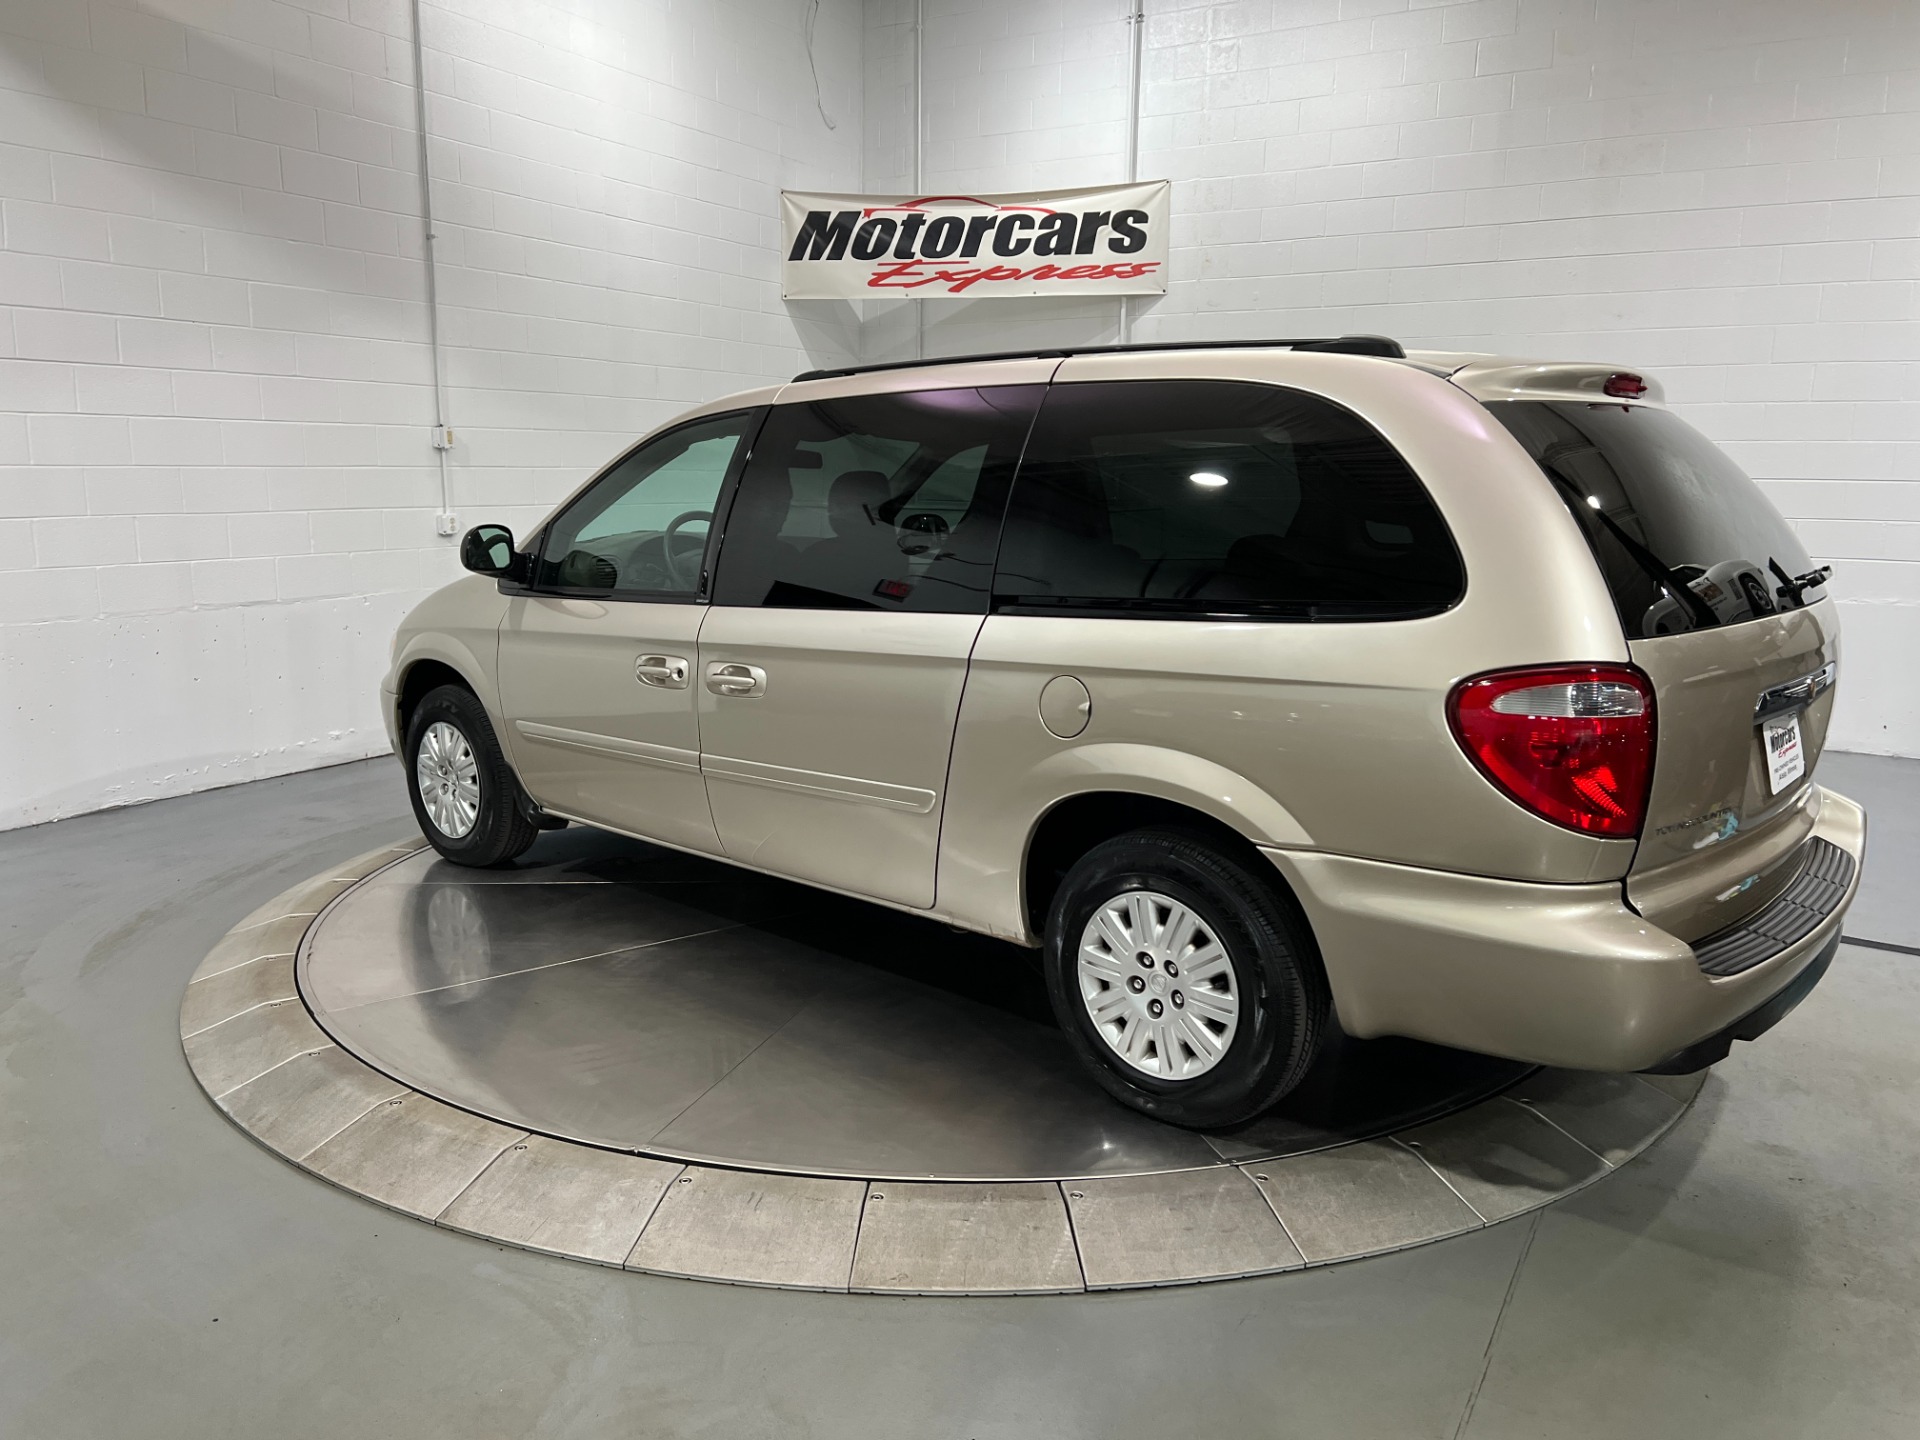 Used-2005-Chrysler-Town-and-Country-LX-FWD